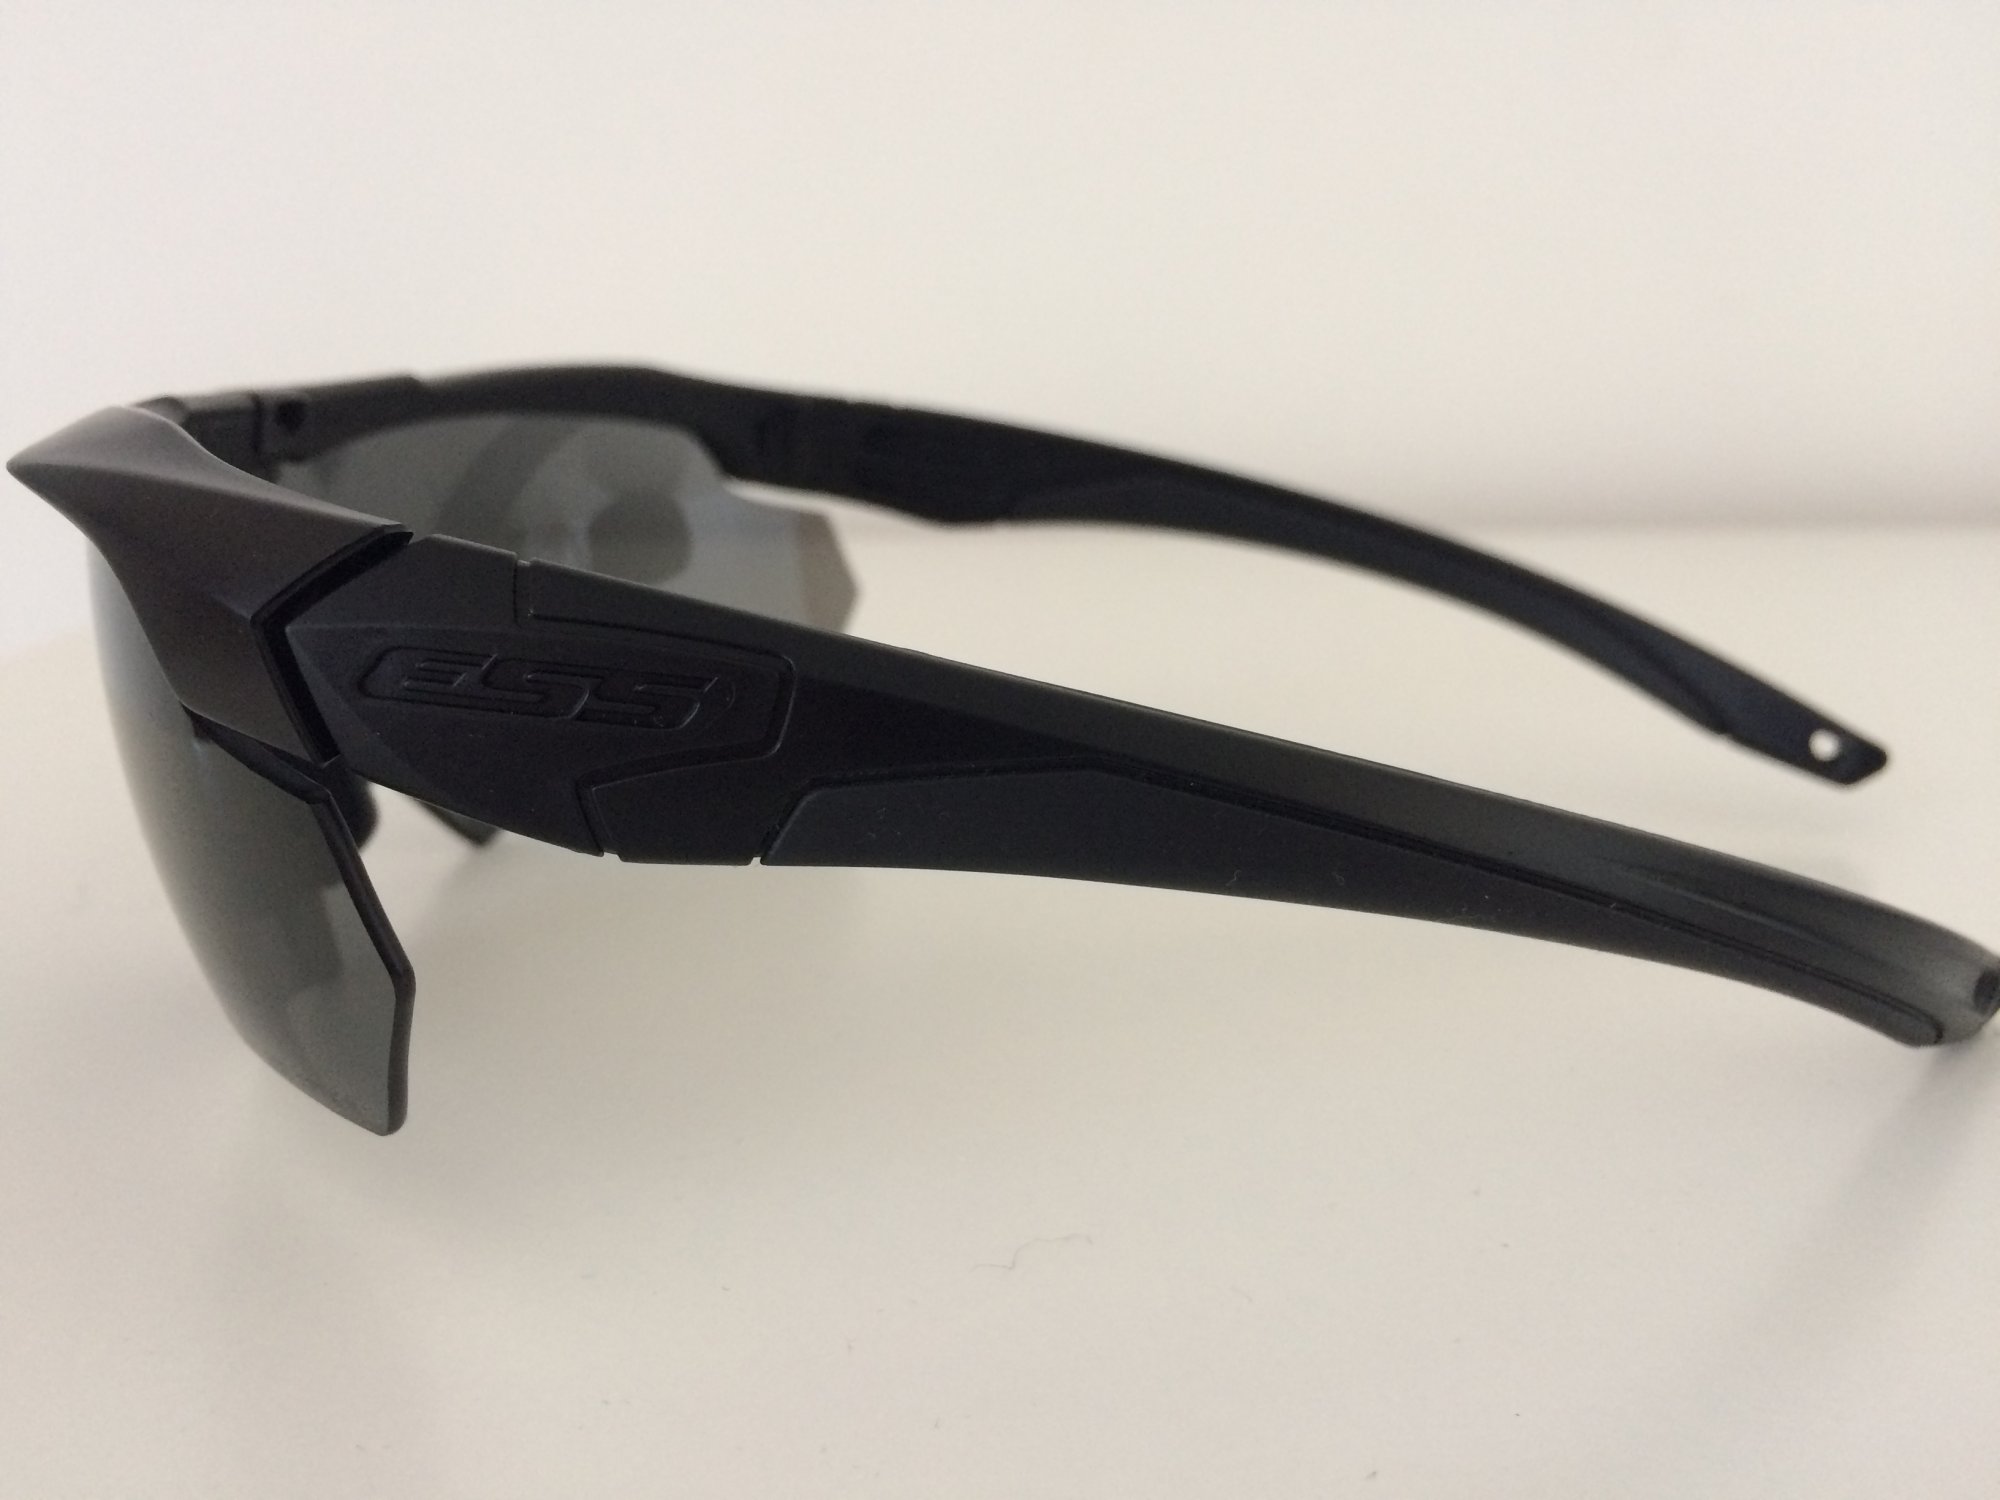 Ess Crossbow Ballistic glasses - Tinted / Clear - Gear - Airsoft Forums UK